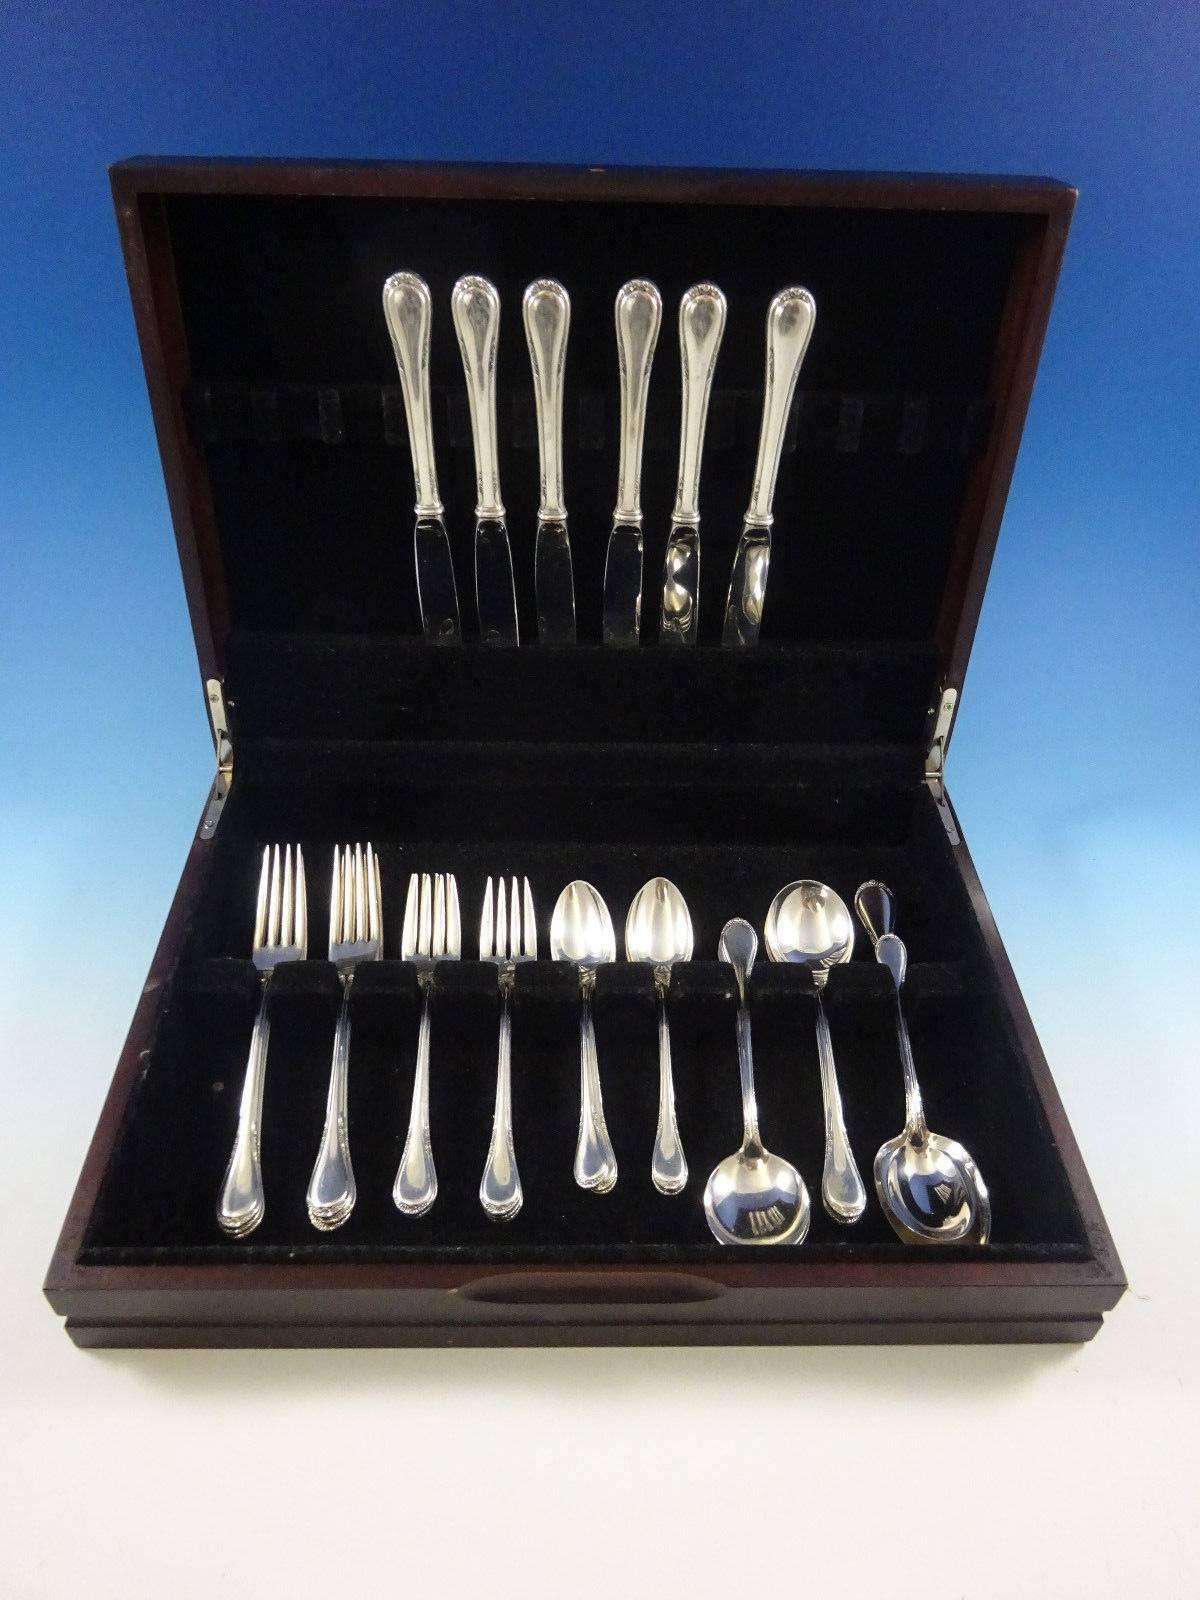 Rare Evening Rose by Lunt sterling silver flatware set of 32 pieces. This pattern is quite scarce. This set includes: Six knives, 8 7/8